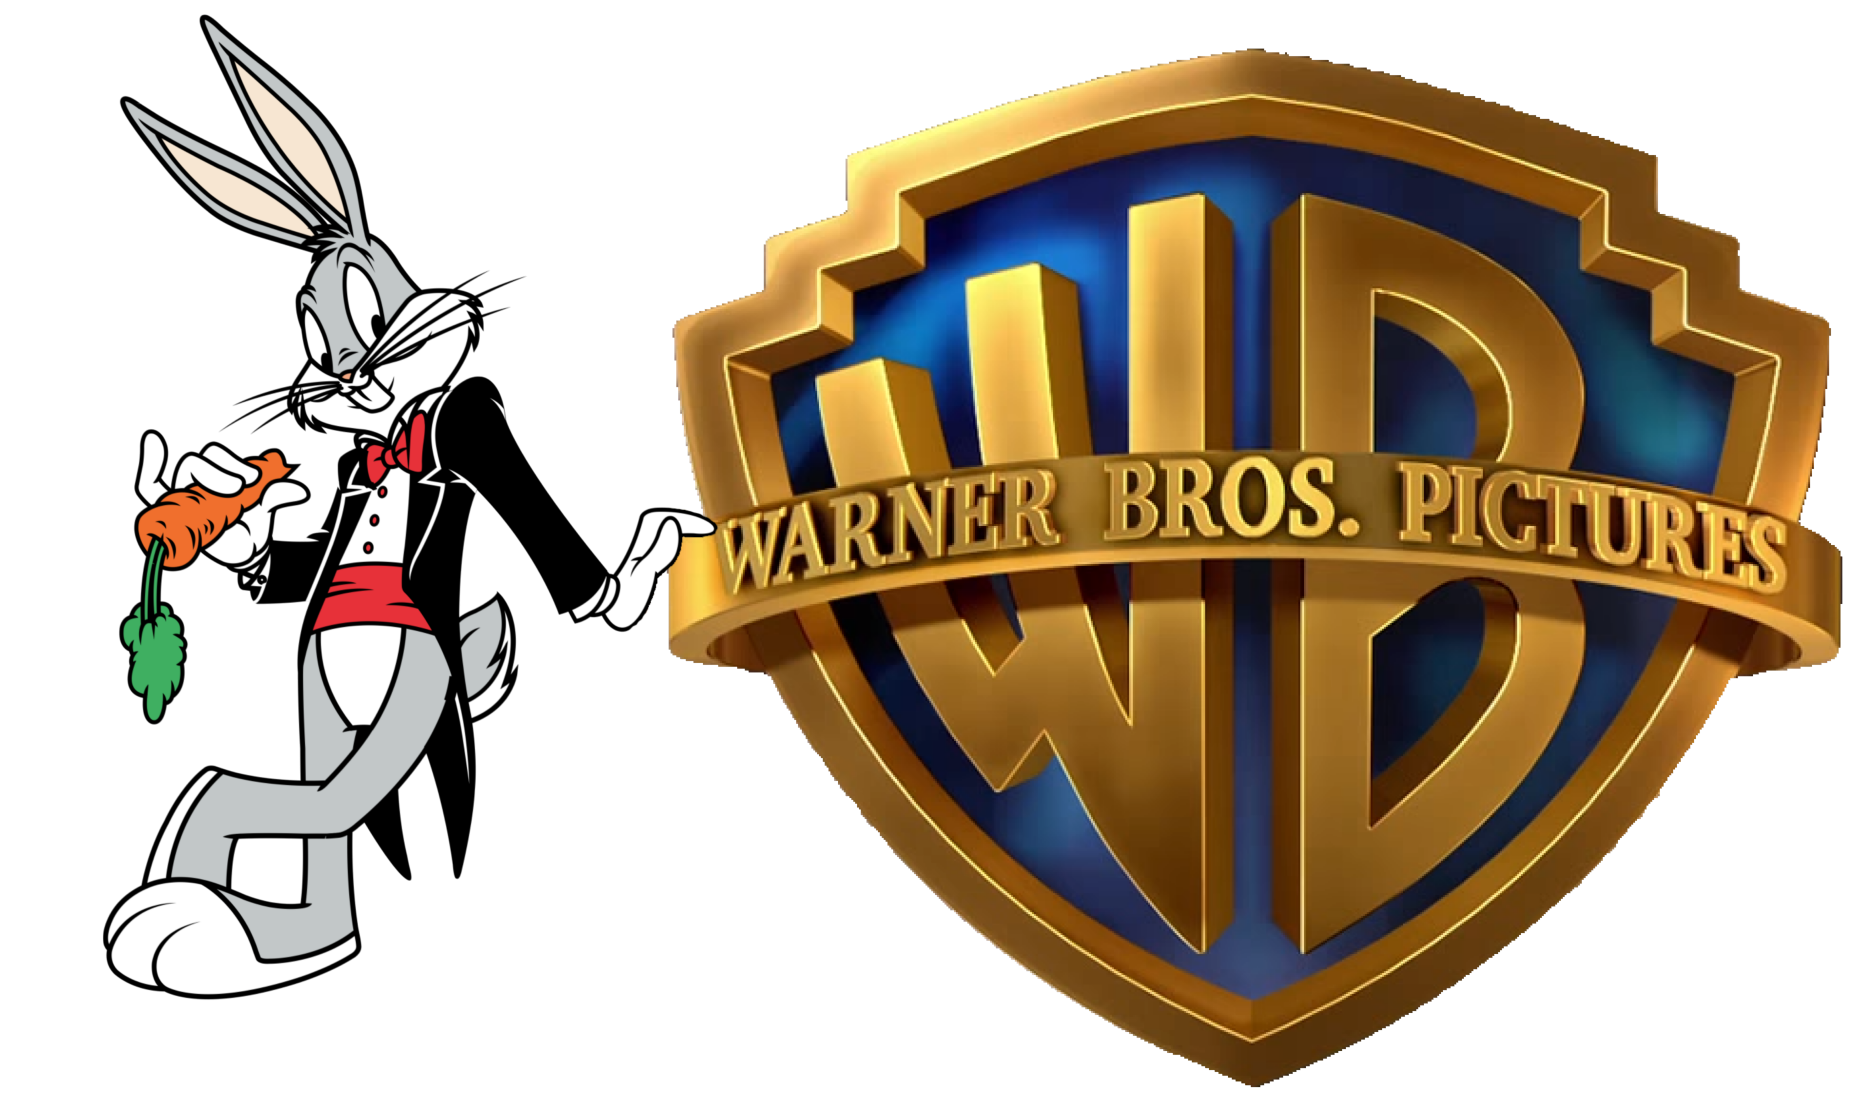 Warner Bros. Pictures Gold Logo With Bugs Bunny by Voltron5051 on DeviantArt